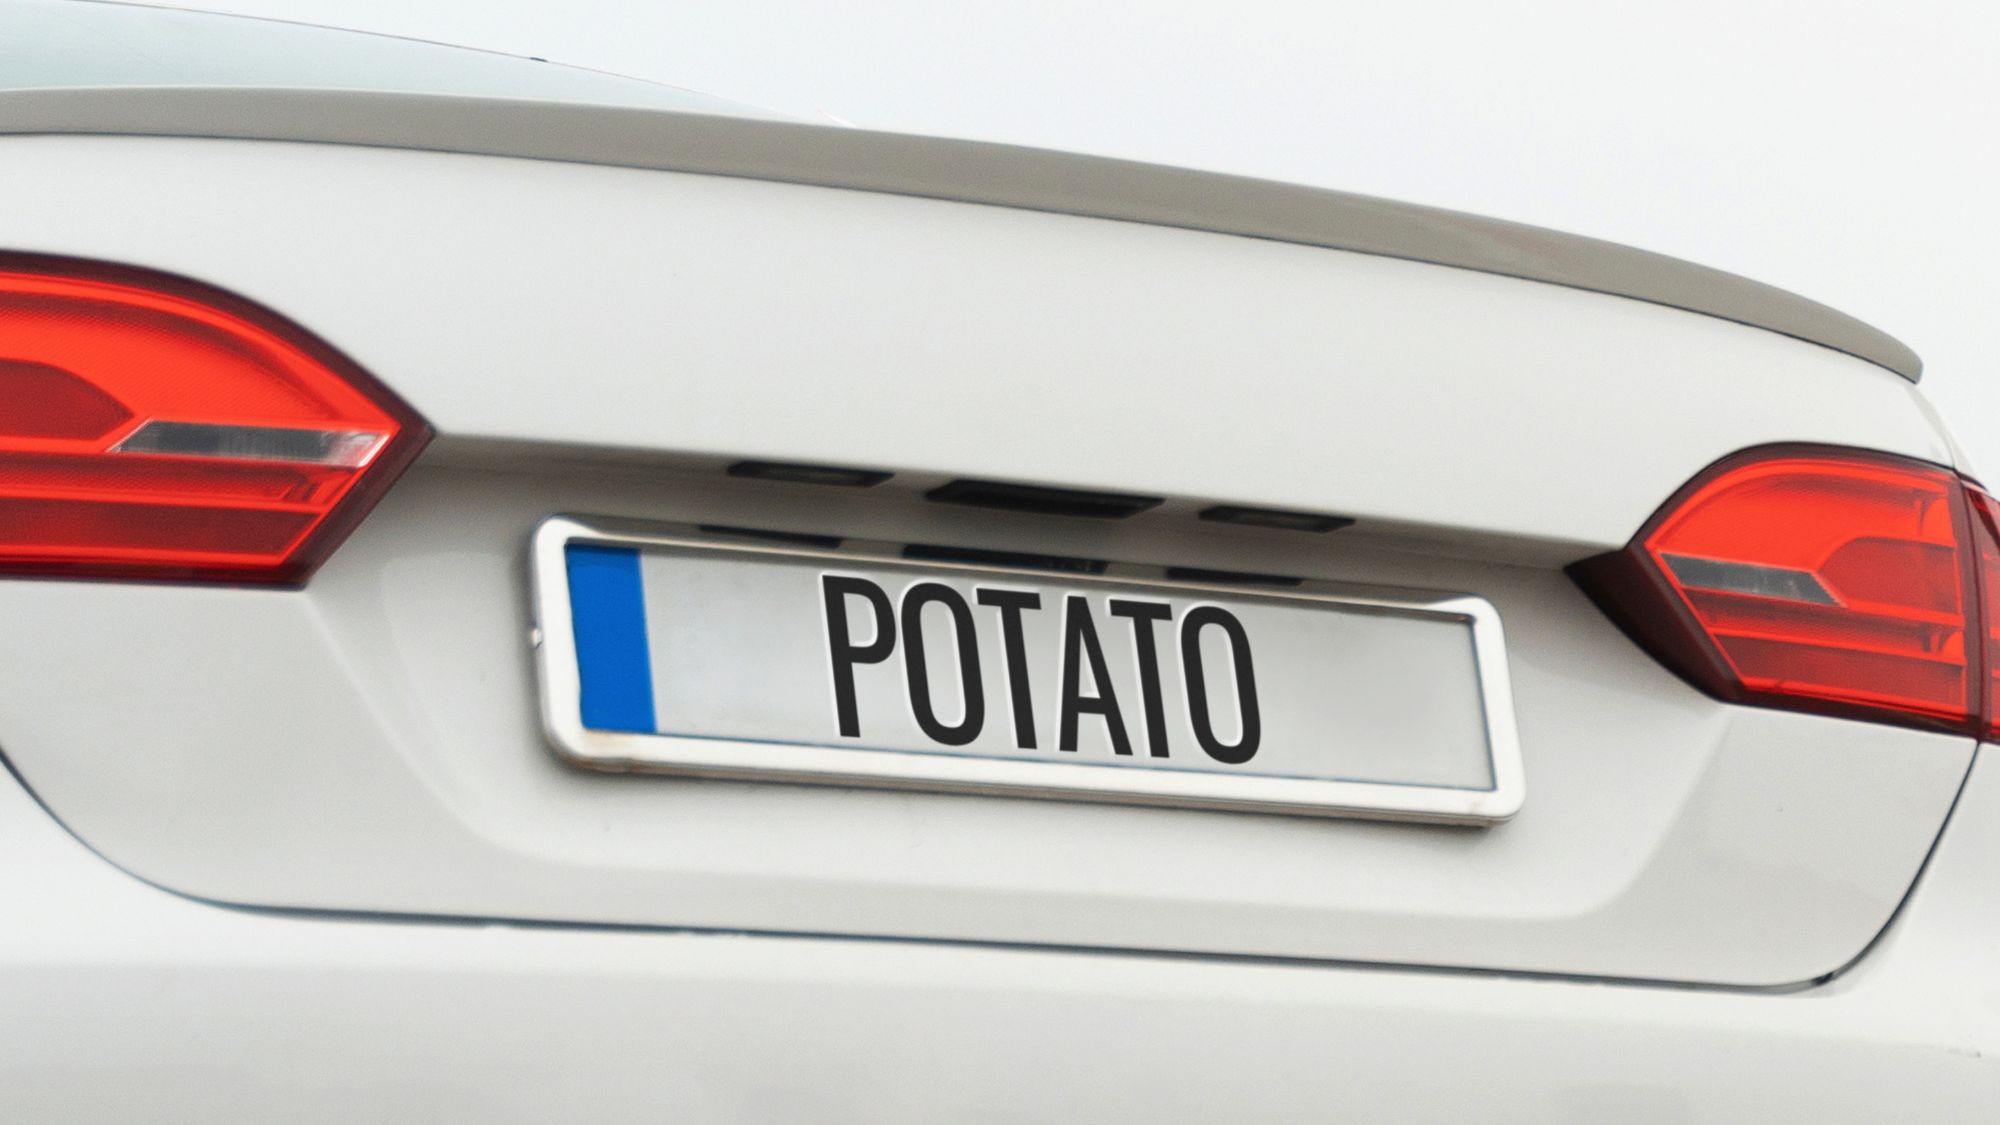 White car with 'potato' on back, displaying number plate sticky pads. Learn about automatic number plate recognition.